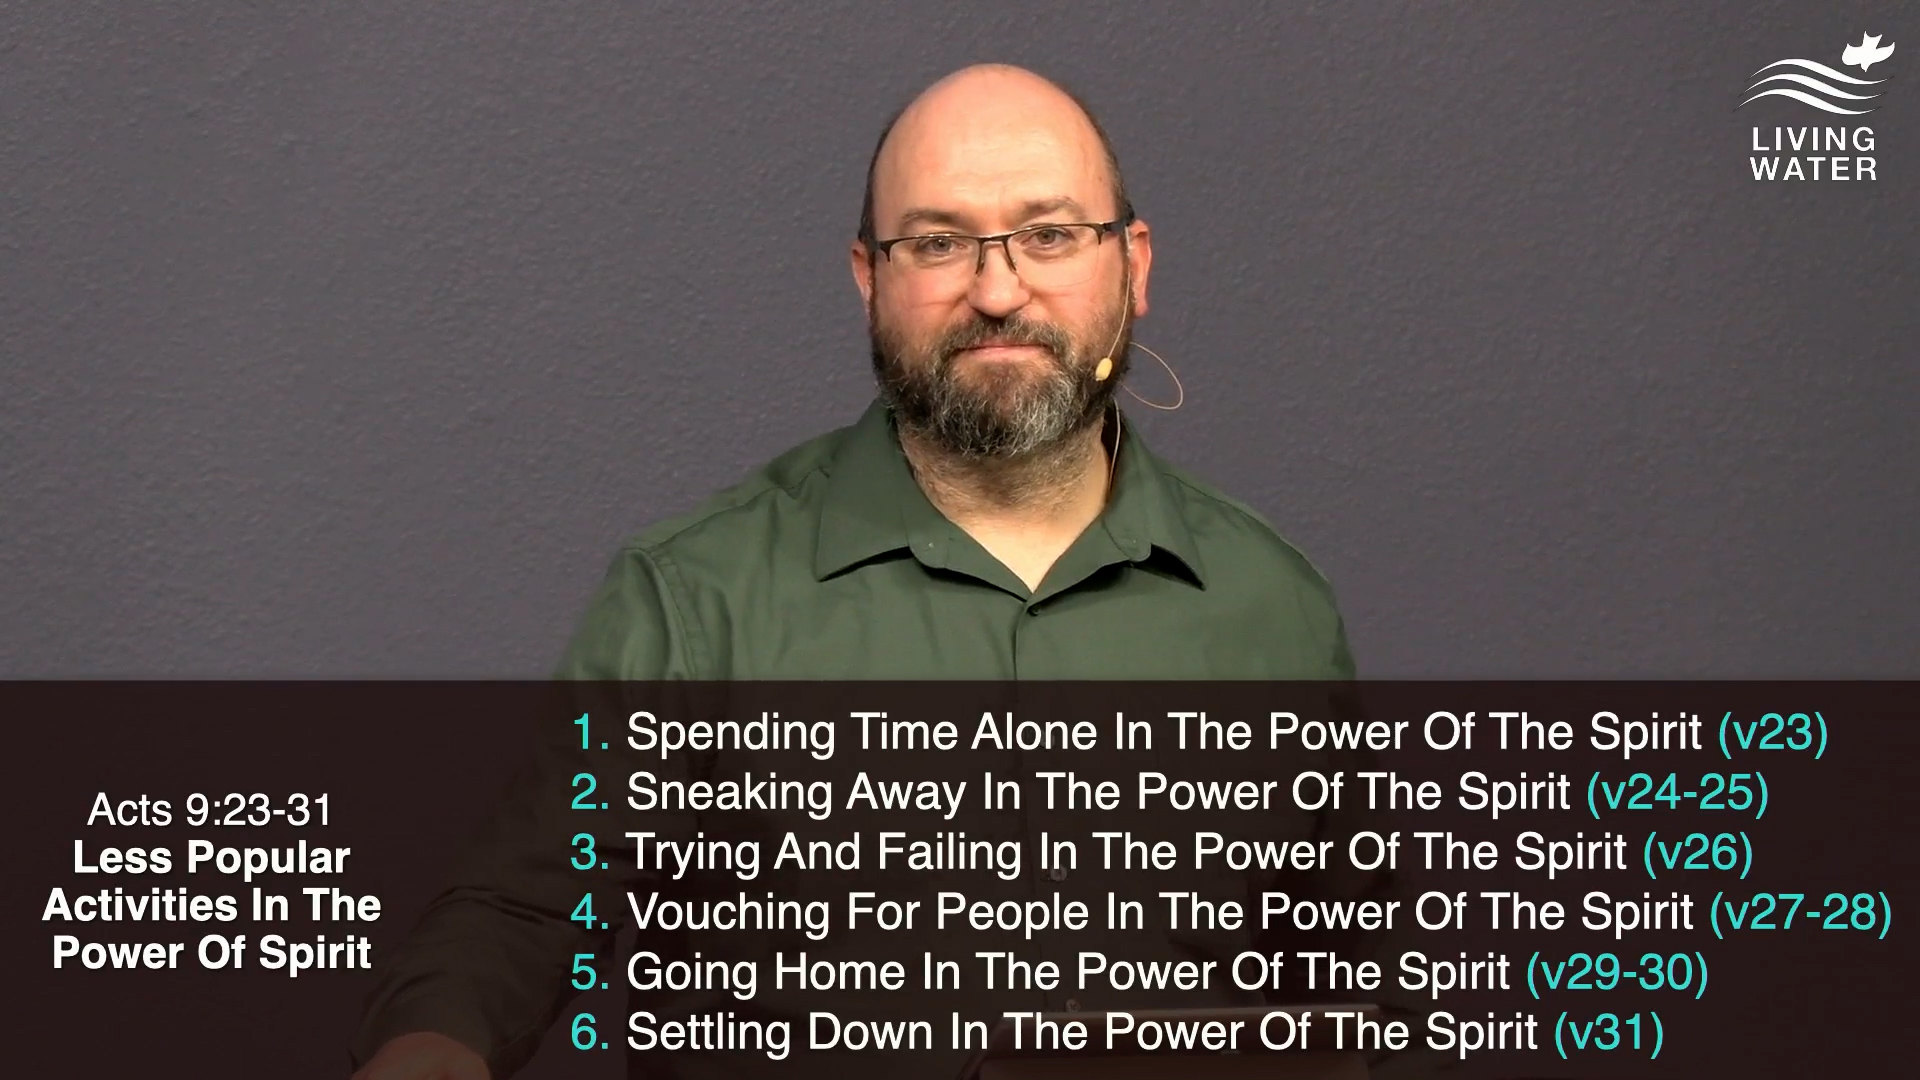 Pastor Jerry Simmons teaching Acts 9:23-31, Less Popular Activities In The Power Of Spirit